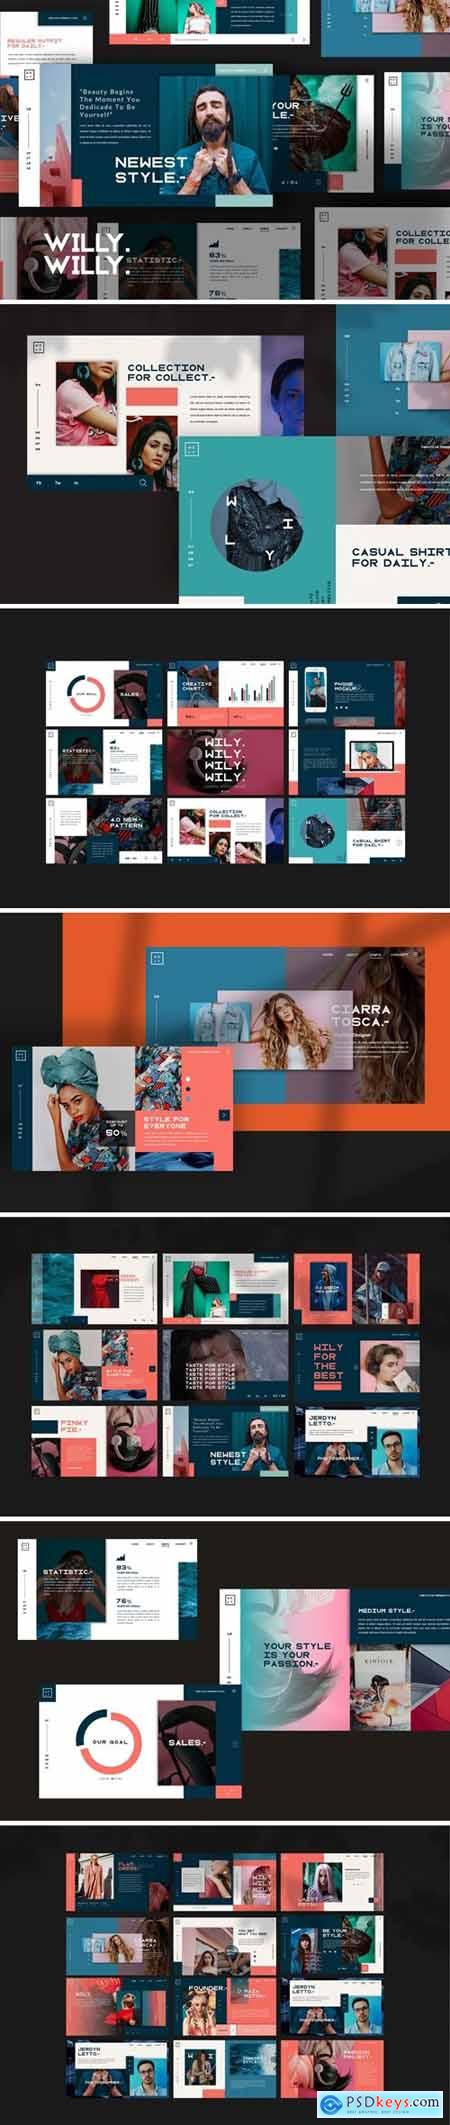 Willy Ui presentation Powerpoint, Keynote and Google Slides Templates